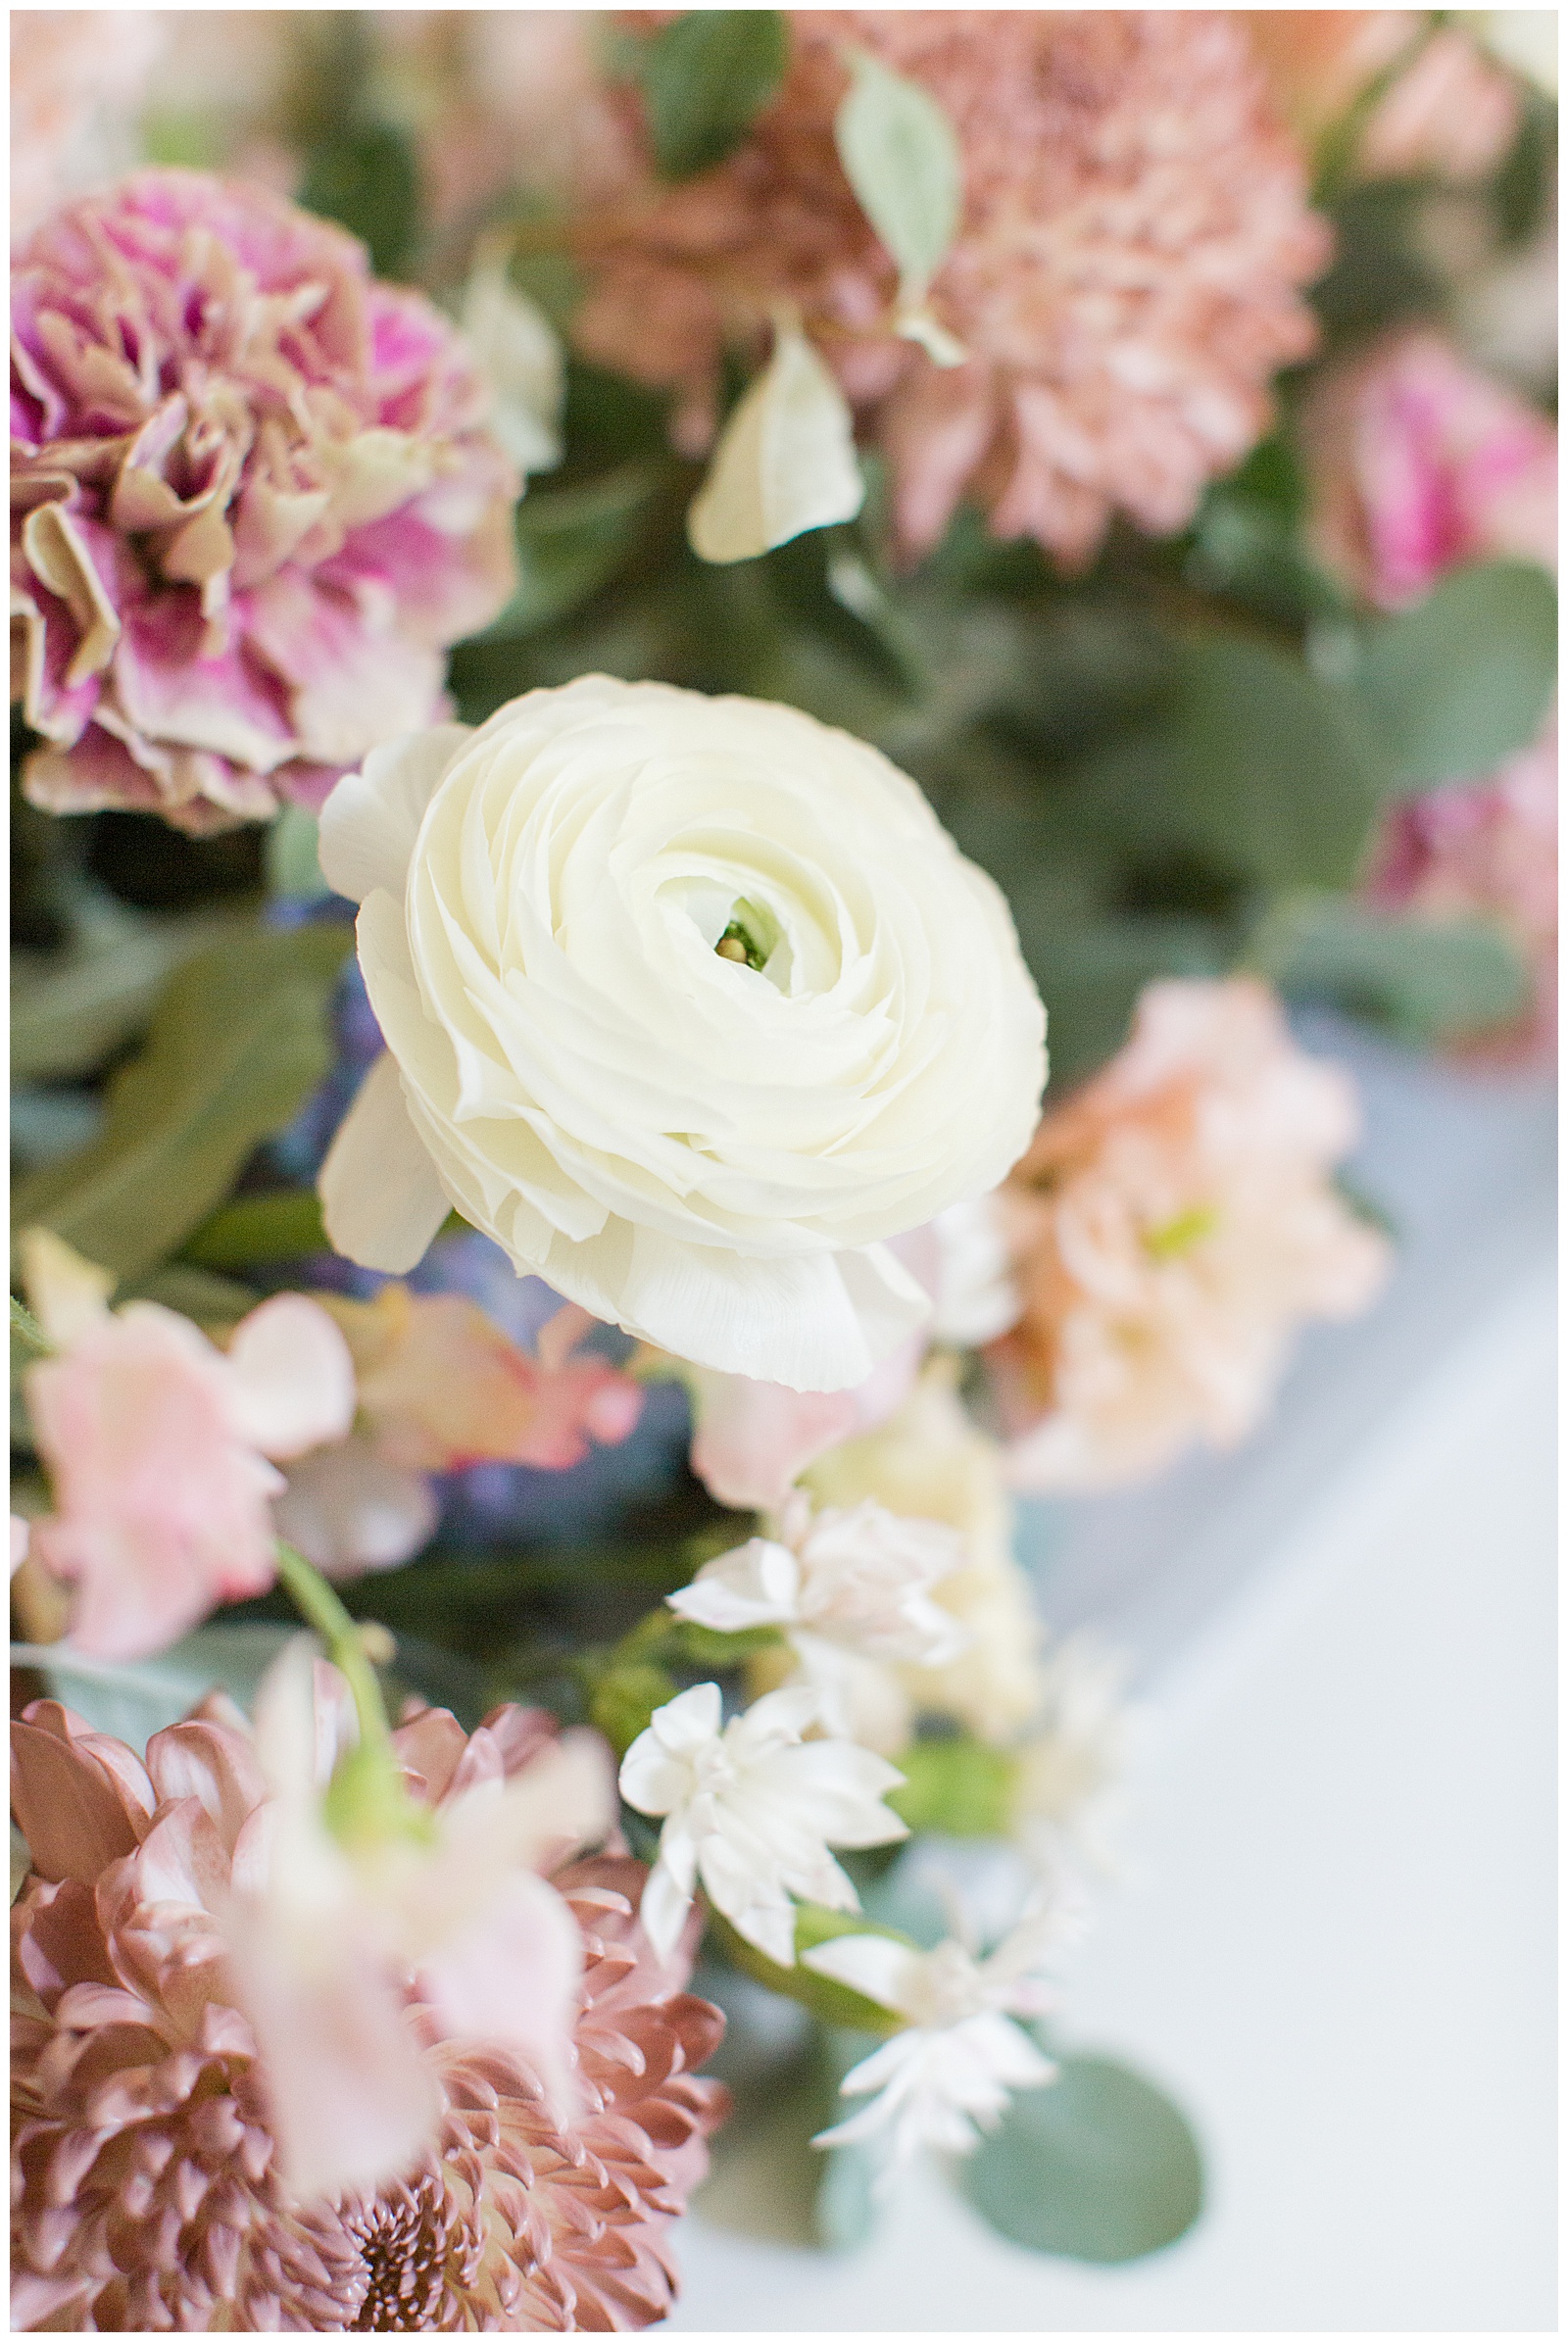 Pastel Themed Spring Wedding at Park Chateua in New Jersey by Jocelyn Cruz Photography. Planning by Heather Bengee Events. Stationary by Emily Williams Design.